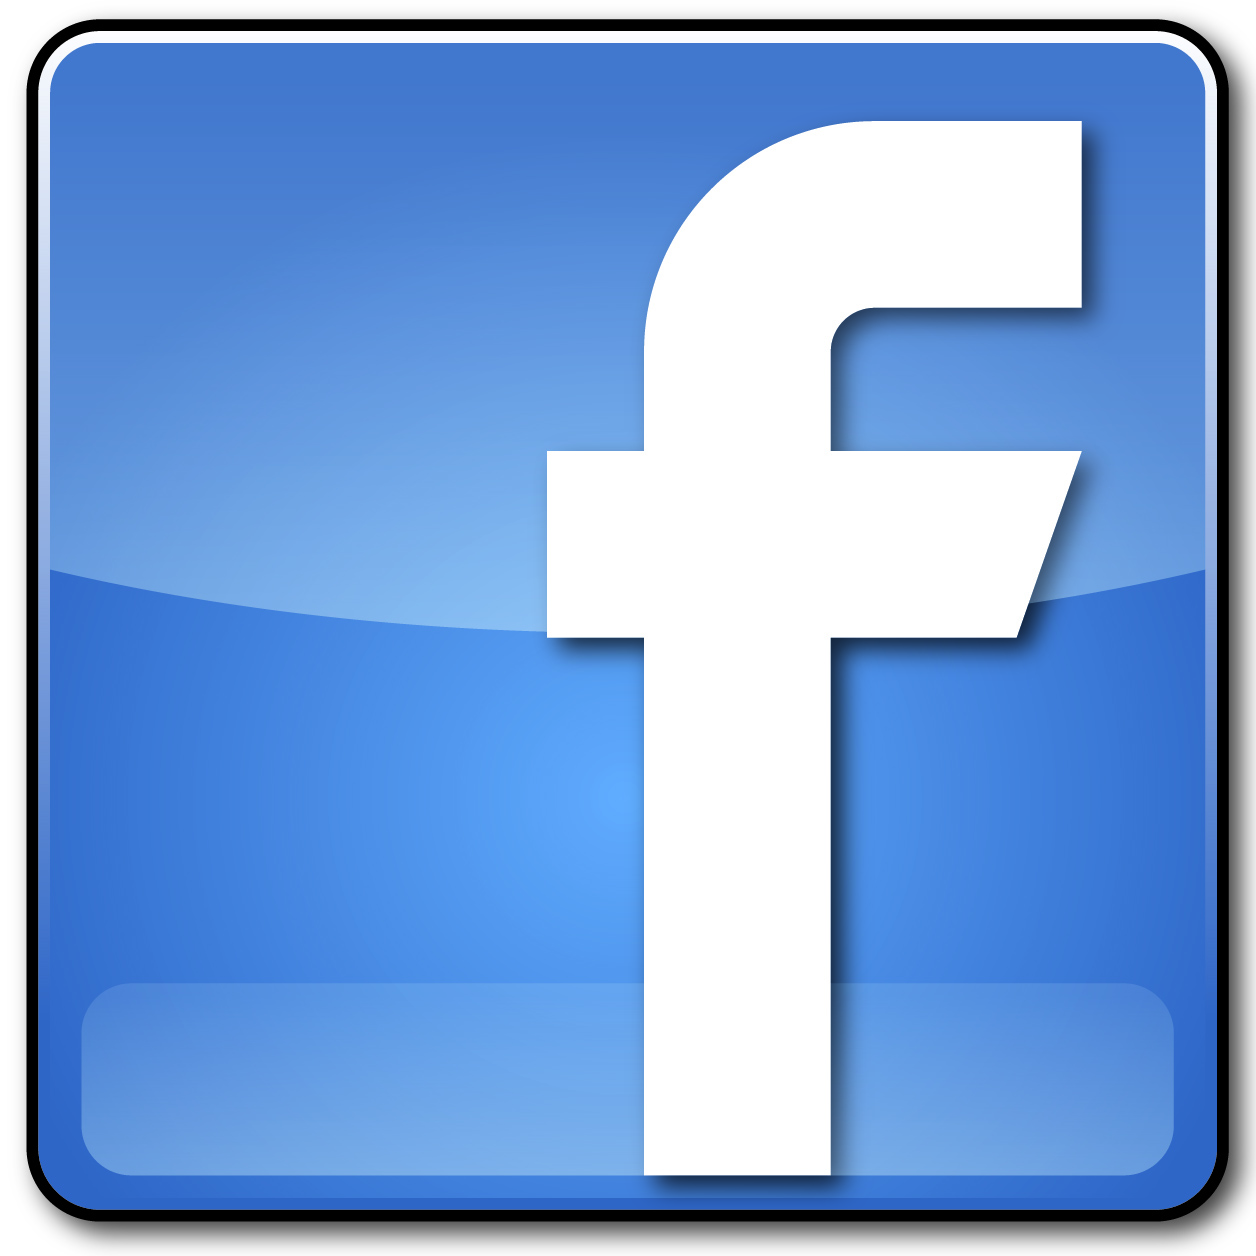 10 Facebook Logo Download Free Cliparts That You Can Download To You